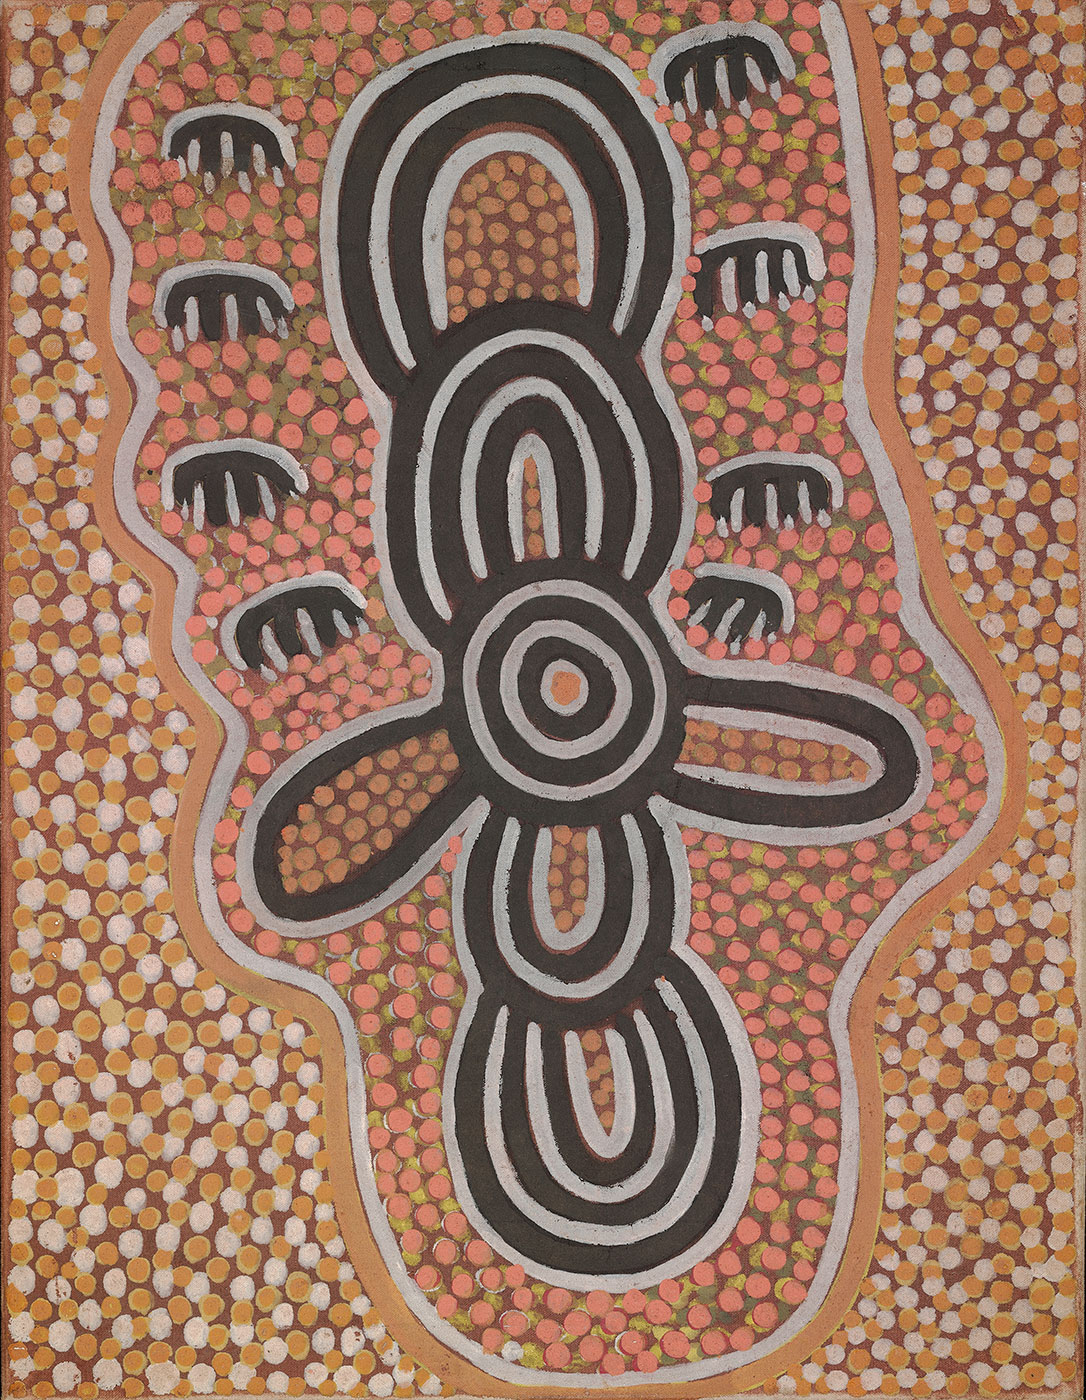 Flying Dingoes 1974 by Mick Namararri Tjapaltjarri. - click to view larger image